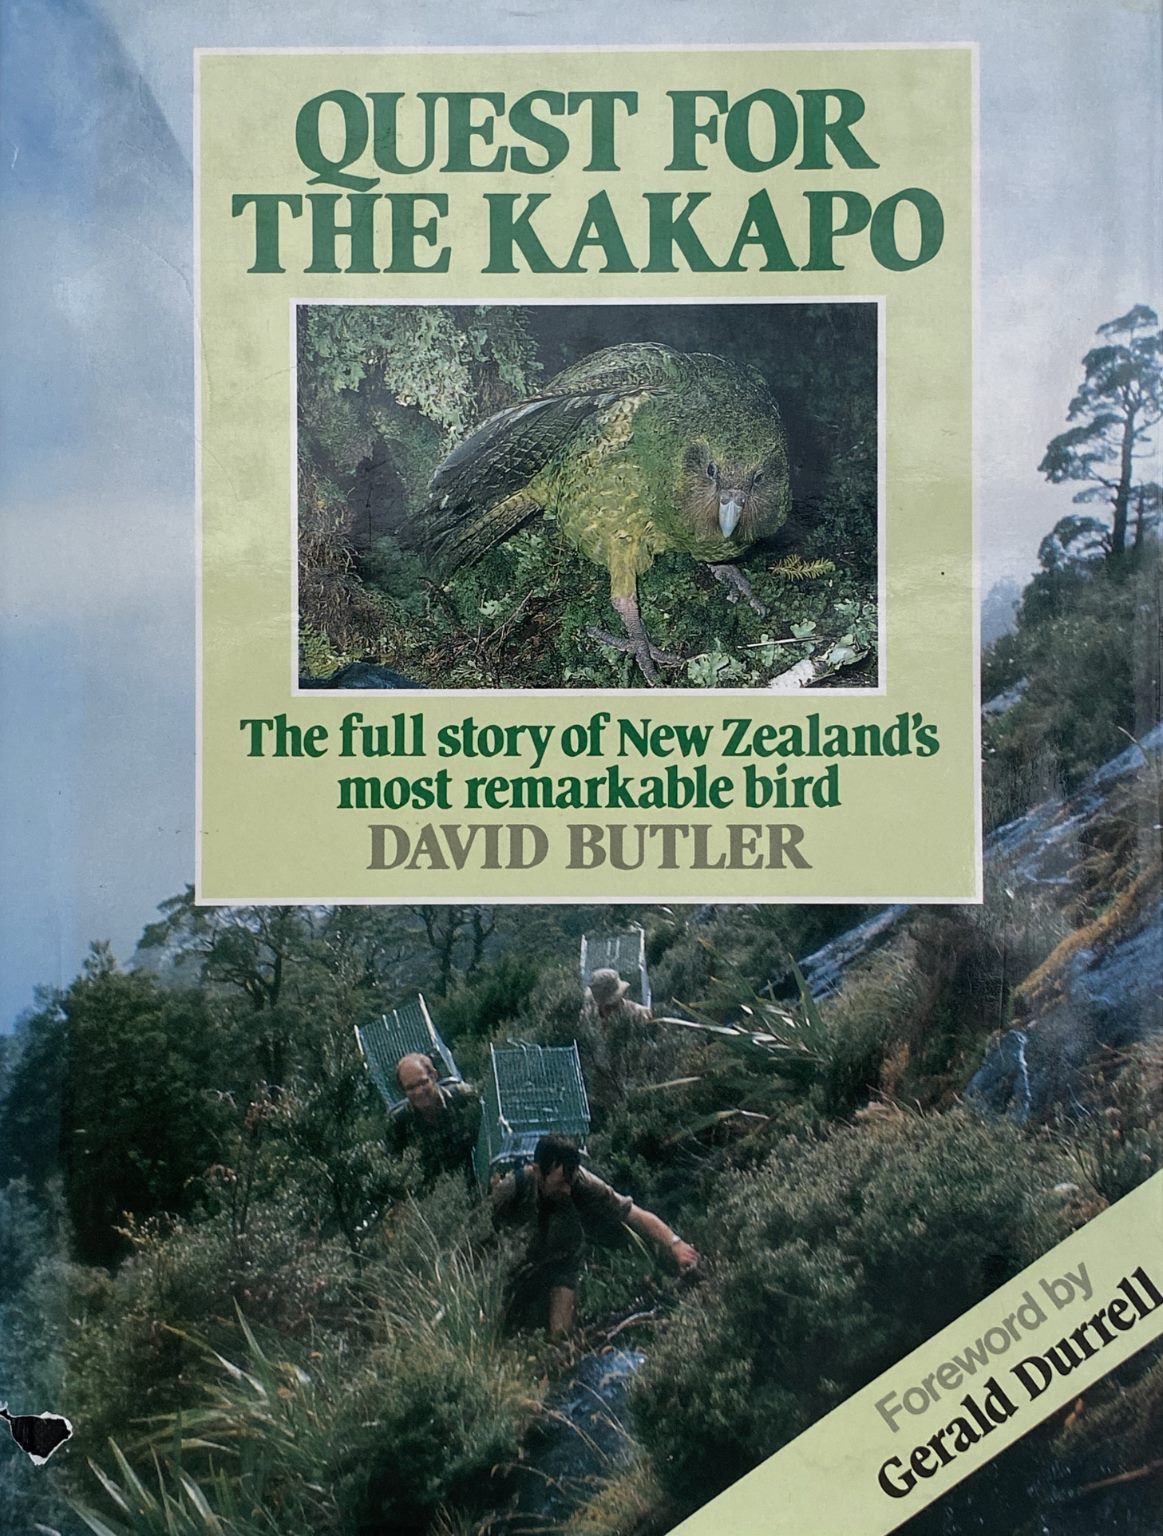 QUEST FOR THE KAKAPO: The Full Story of New Zealand’s Most Remarkable Bird